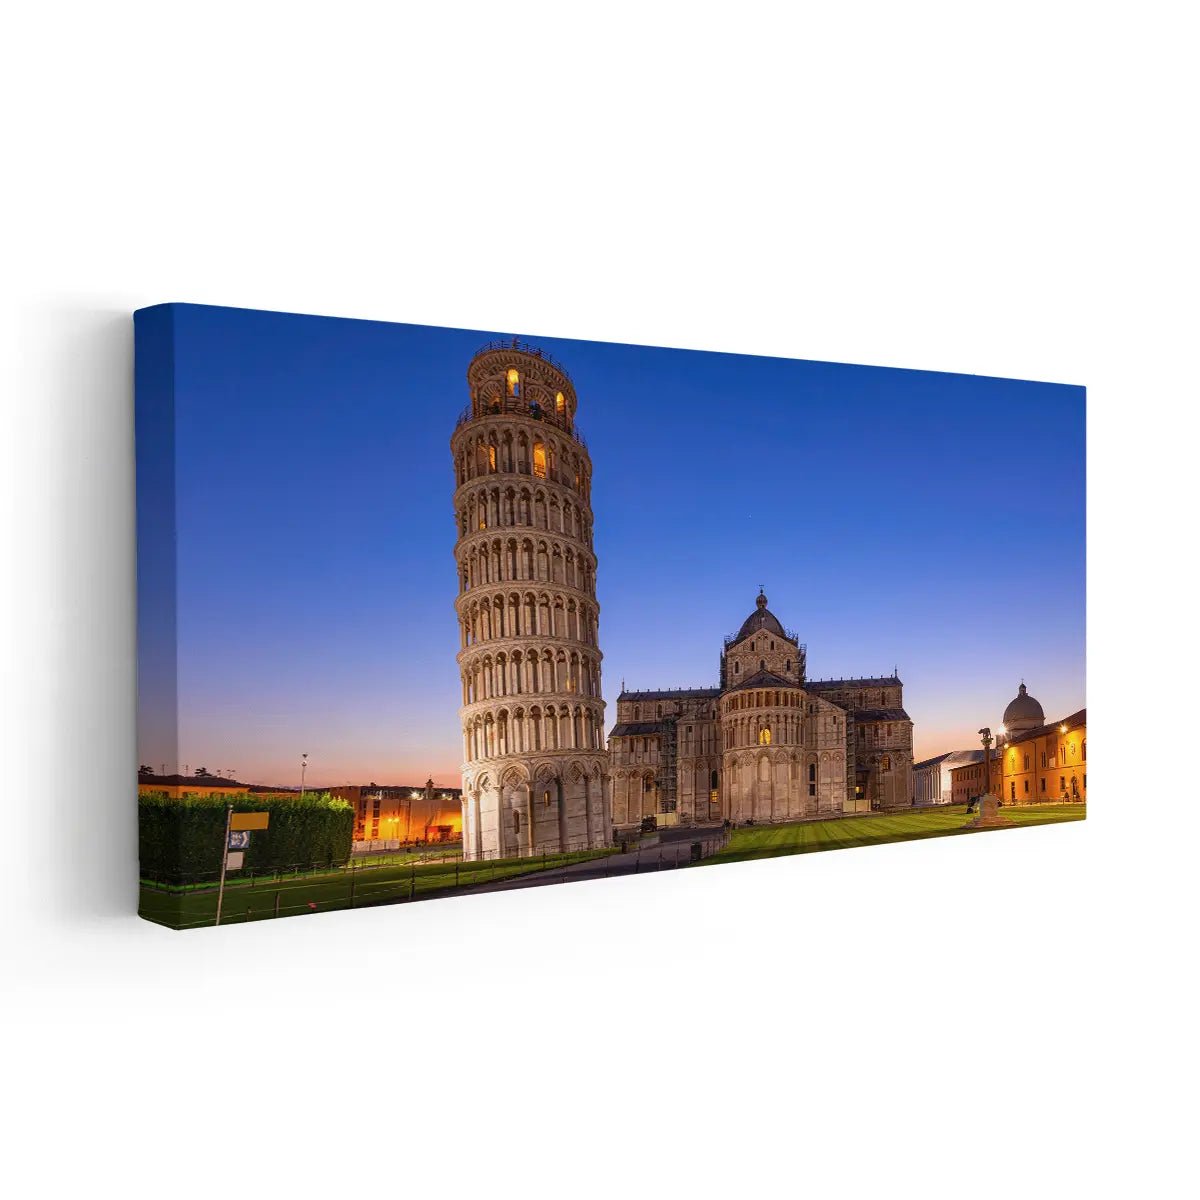 Leaning Tower Of Pizza Wall Art-Stunning Canvas Prints